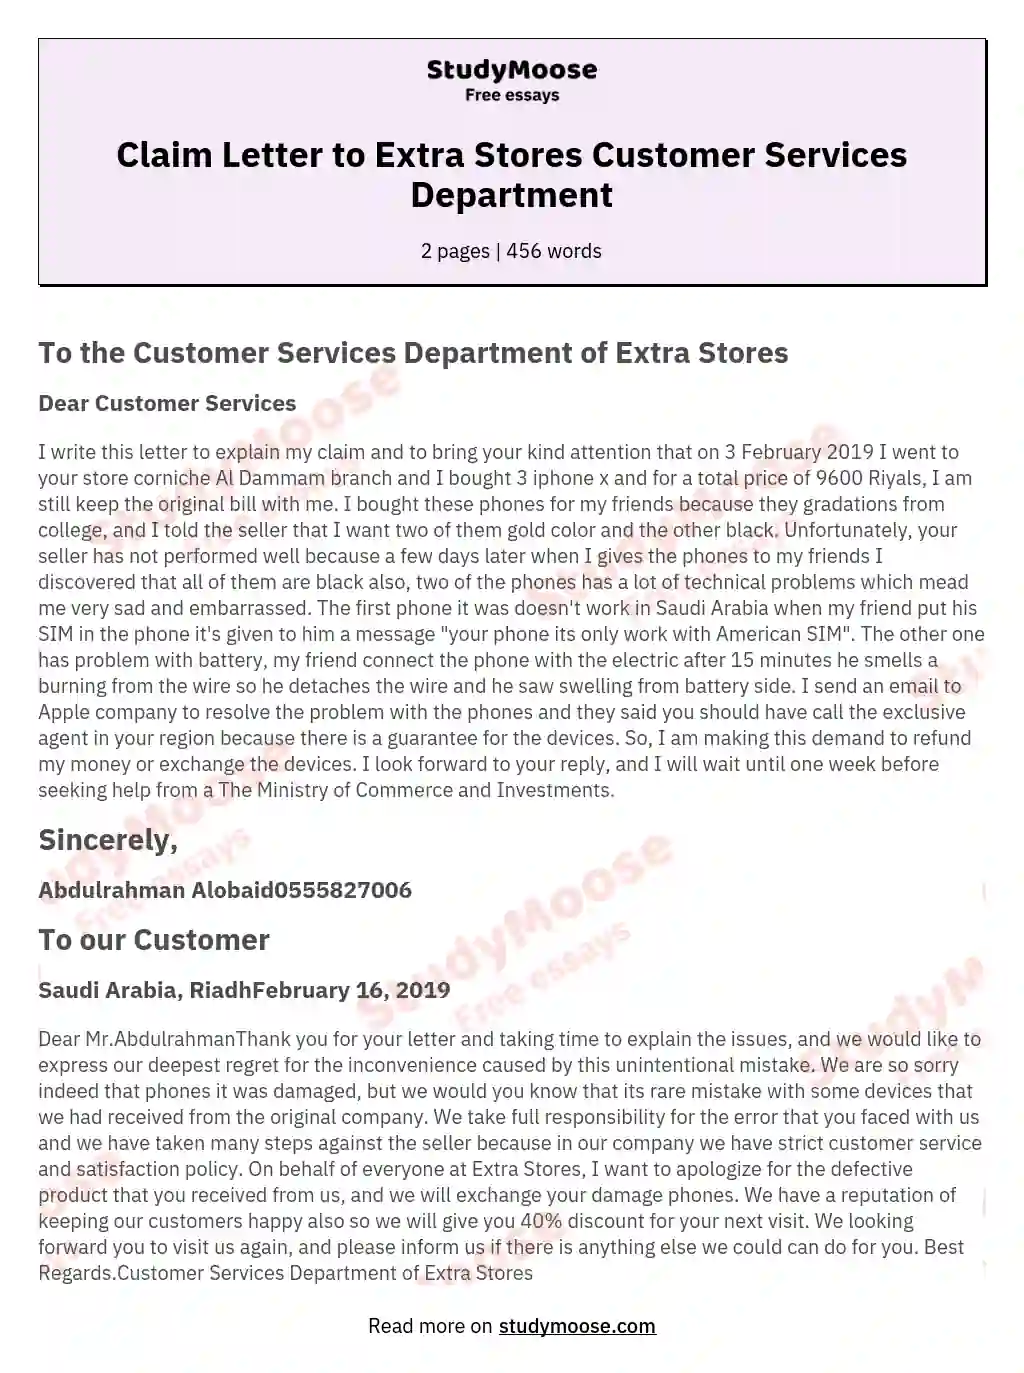 Claim Letter to Extra Stores Customer Services Department essay